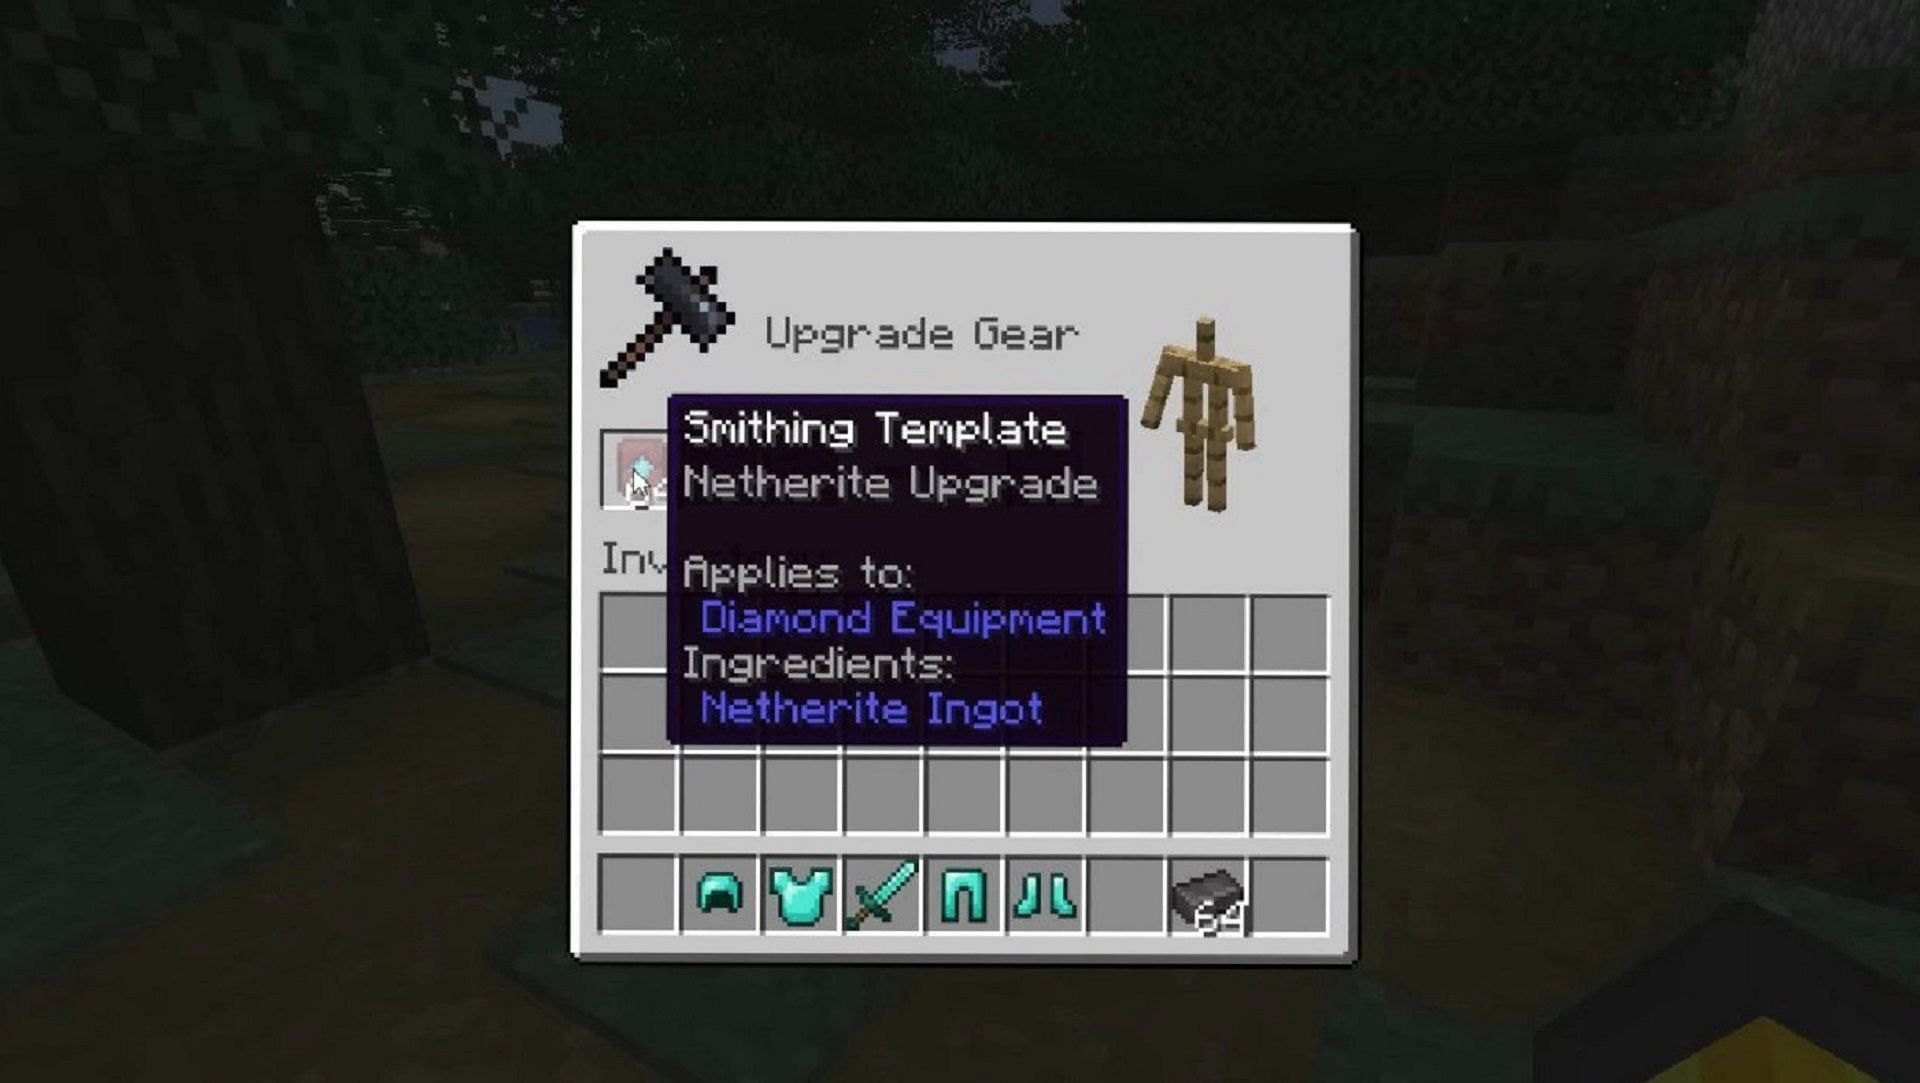 Netherite upgrade templates make the overall progression to acquiring netherite gear slower than before (Image via 9Minecraft)